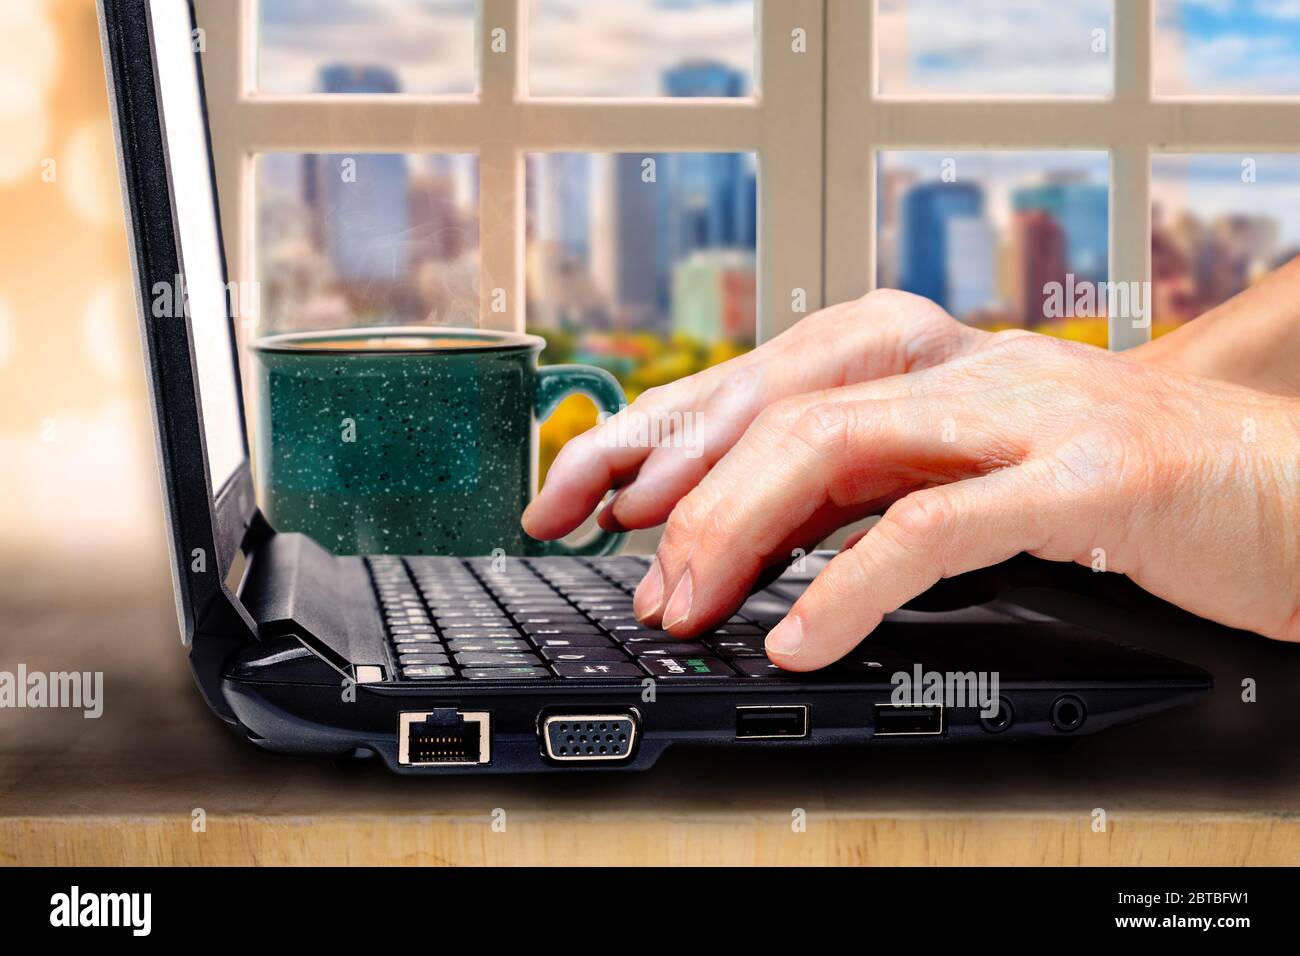 Close up of working from home concept in the new normal after Covid-19 showing fingers on computer laptop keyboard and coffee on table with vintage li Stock Photo